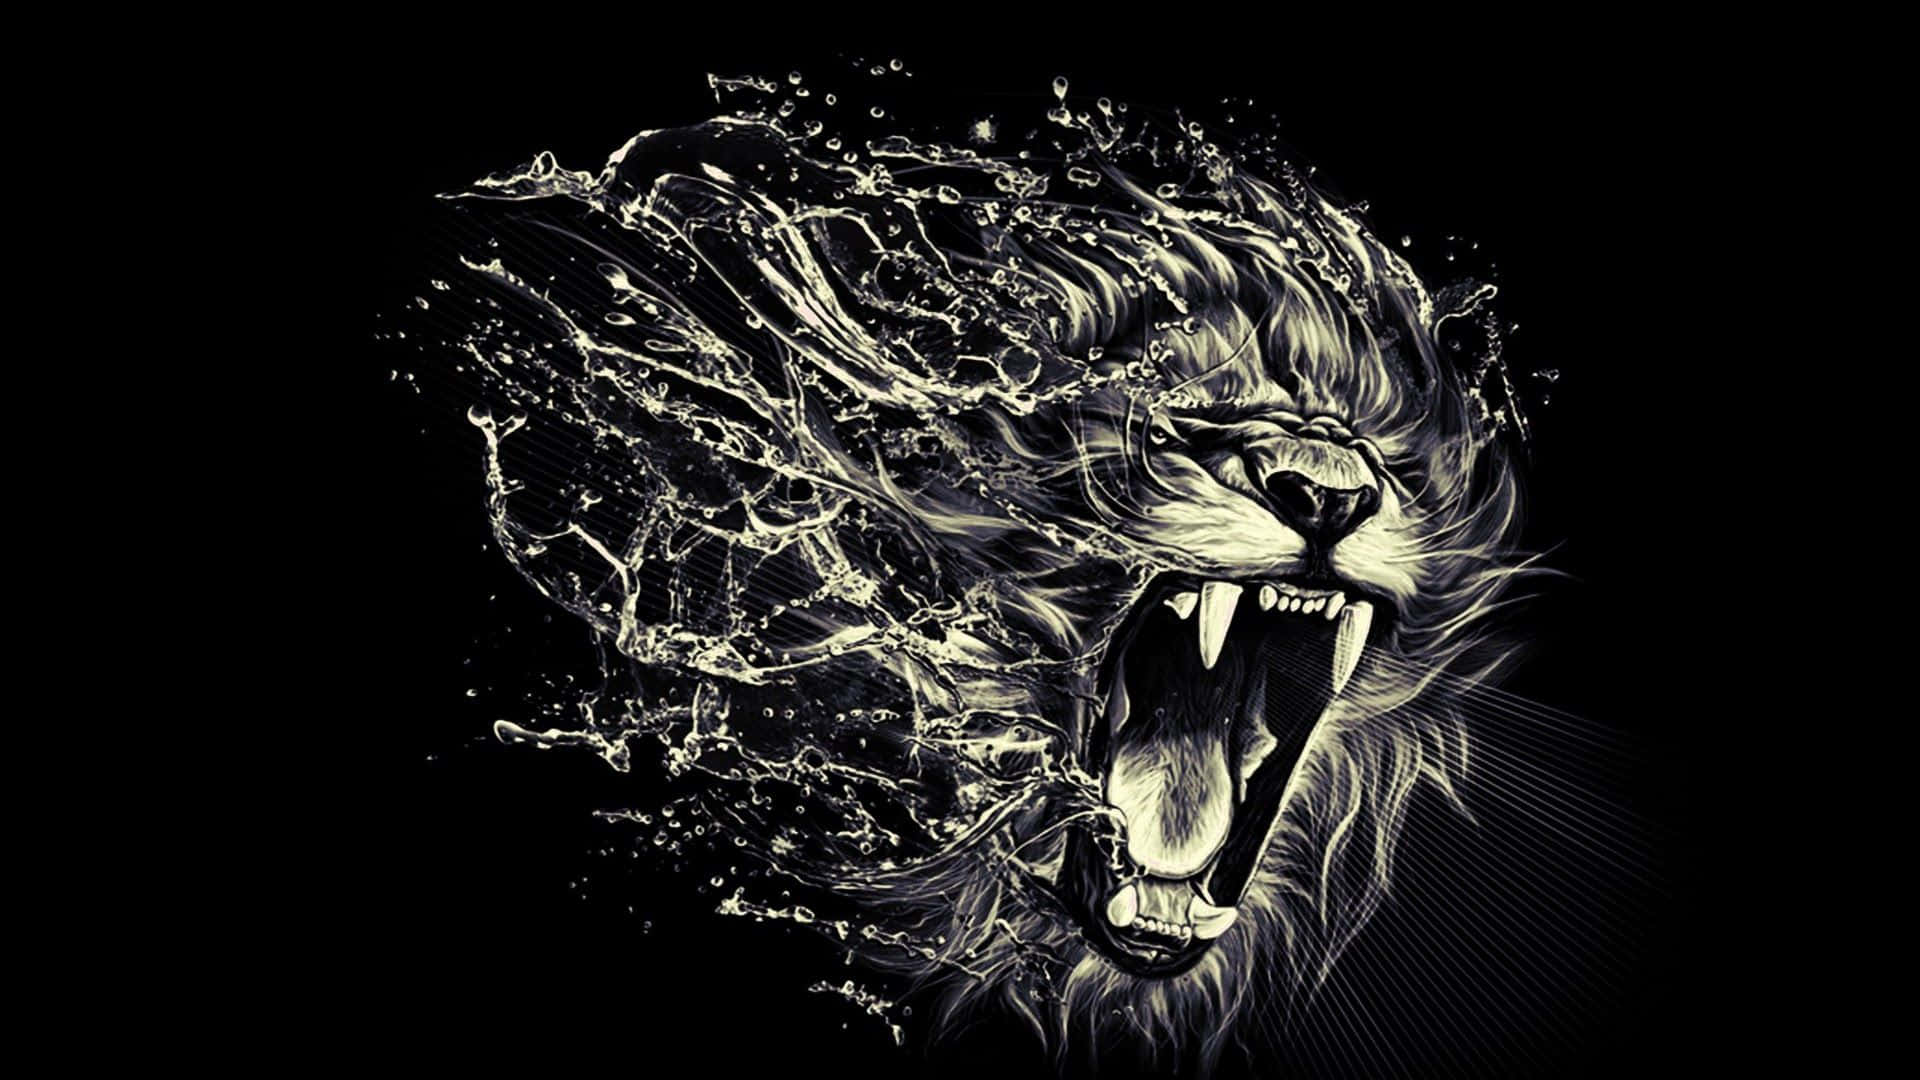 Be A Proud, Strong Leader Like The Black Lion" Wallpaper